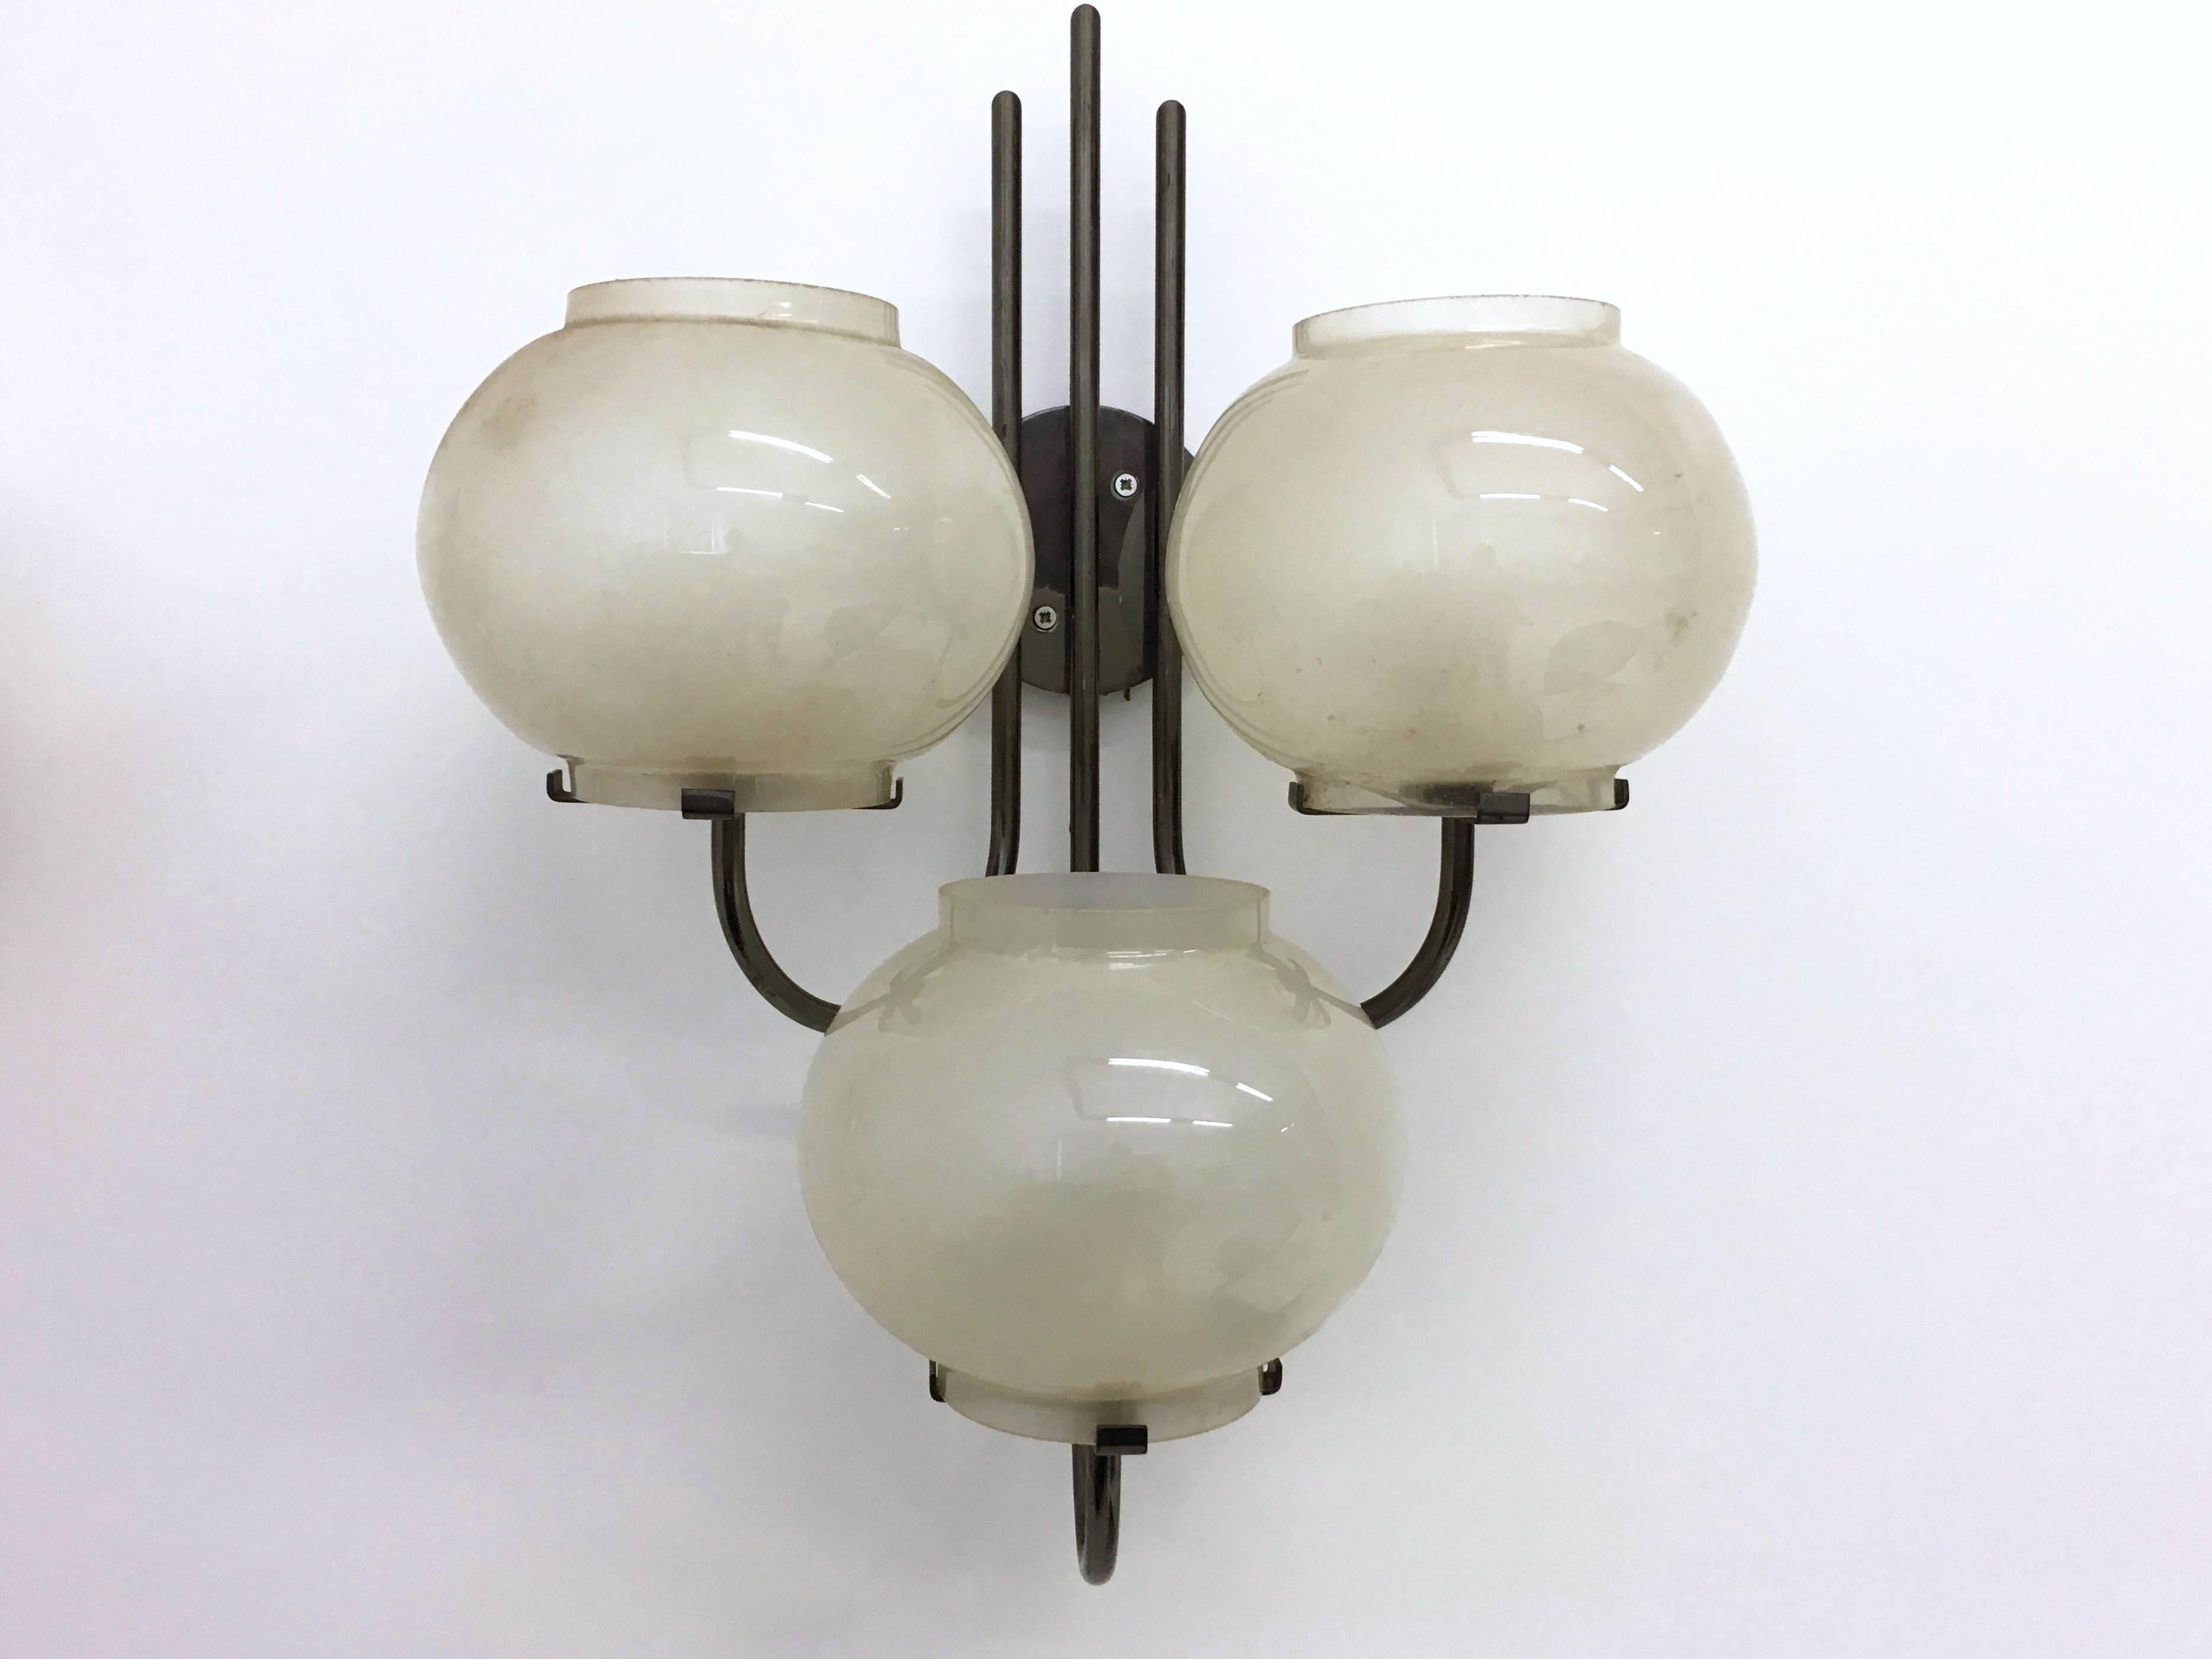 Pair of Sconces in the Style of Gino Sarfatti for Arteluce, Italy, 1960s (Messing)